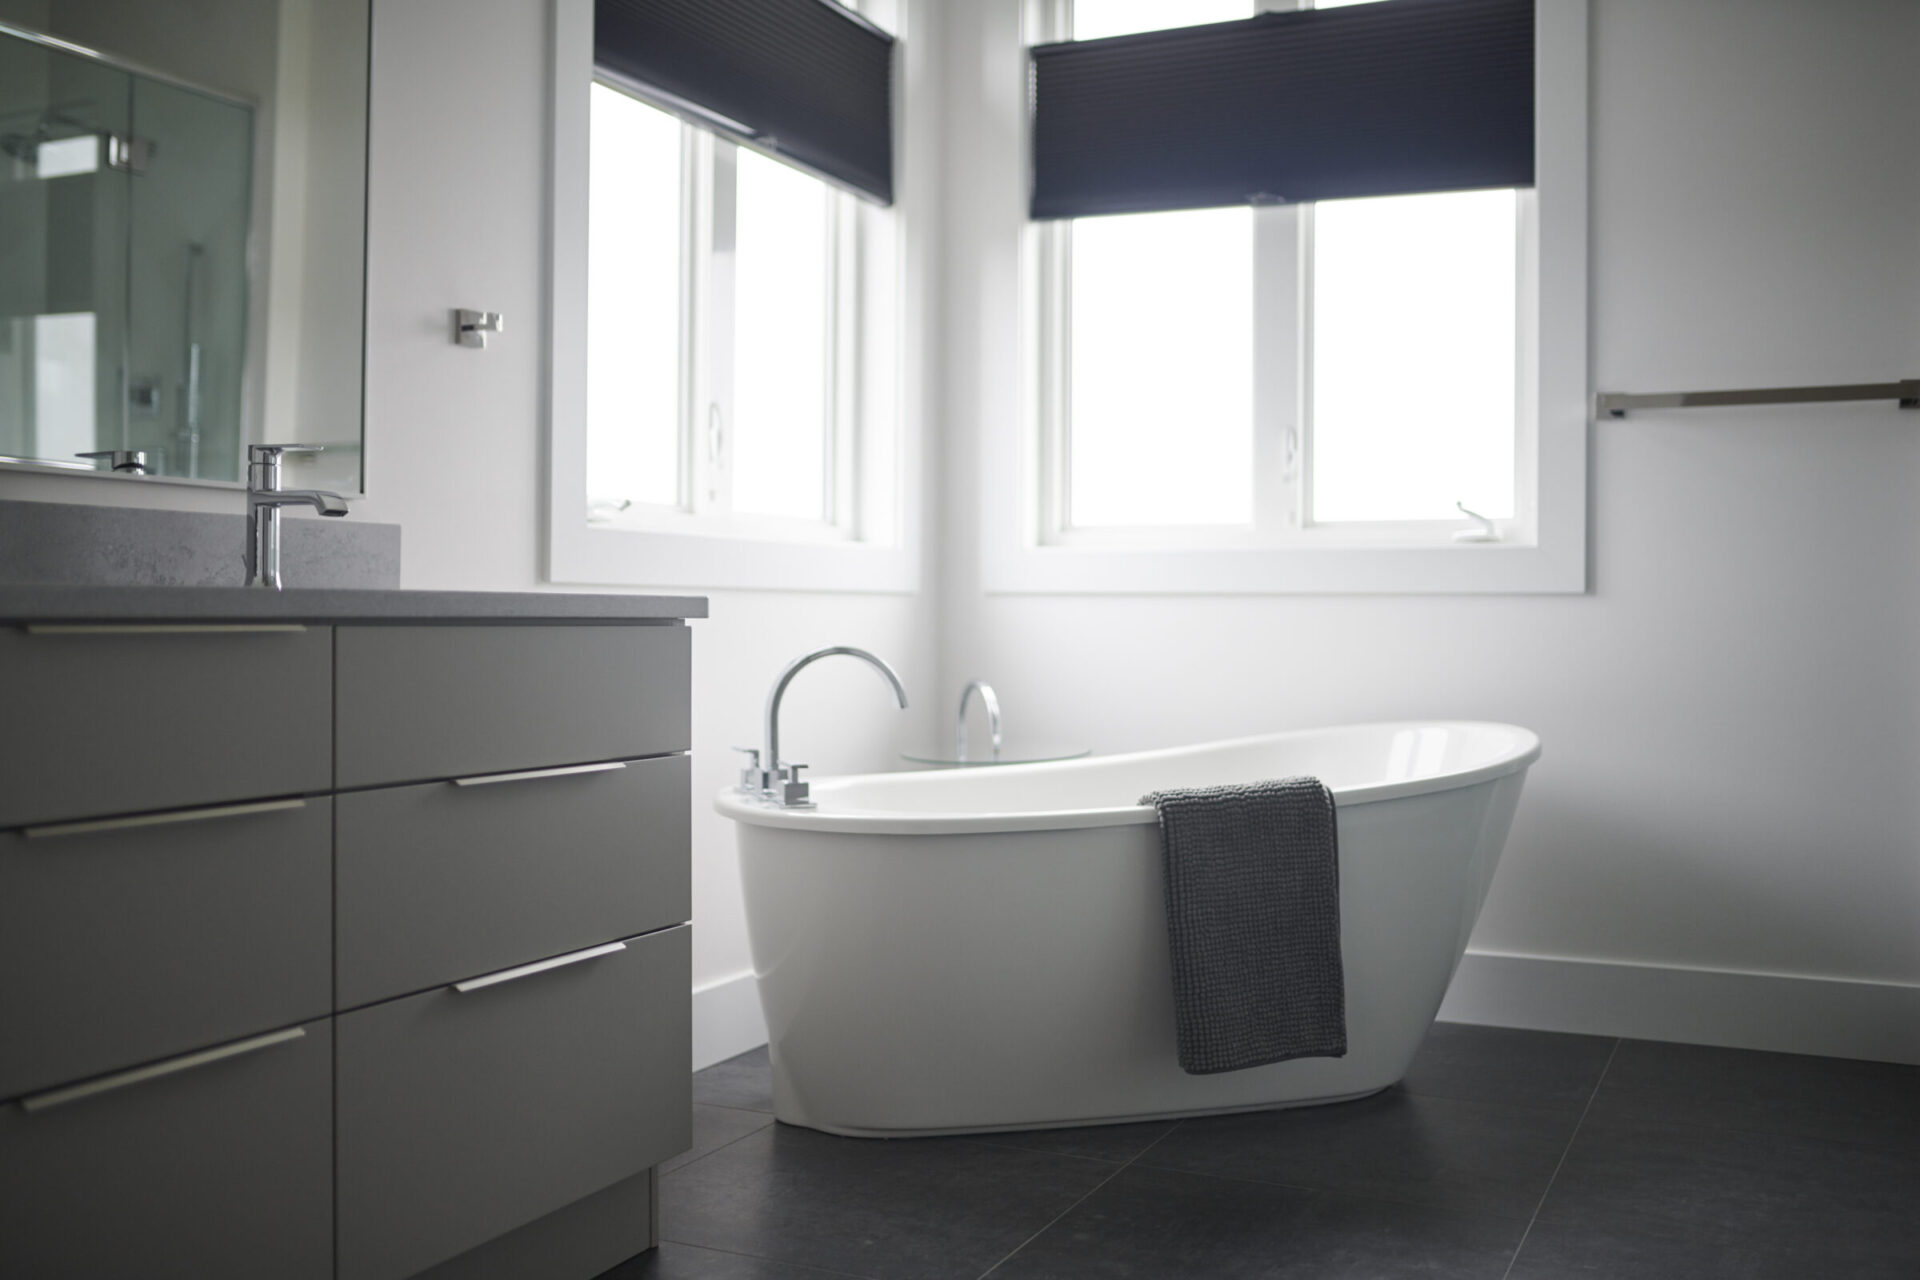 A modern bathroom interior featuring a freestanding bathtub, a vanity with a countertop sink, dark floor tiles, and windows with rolled-up blinds.